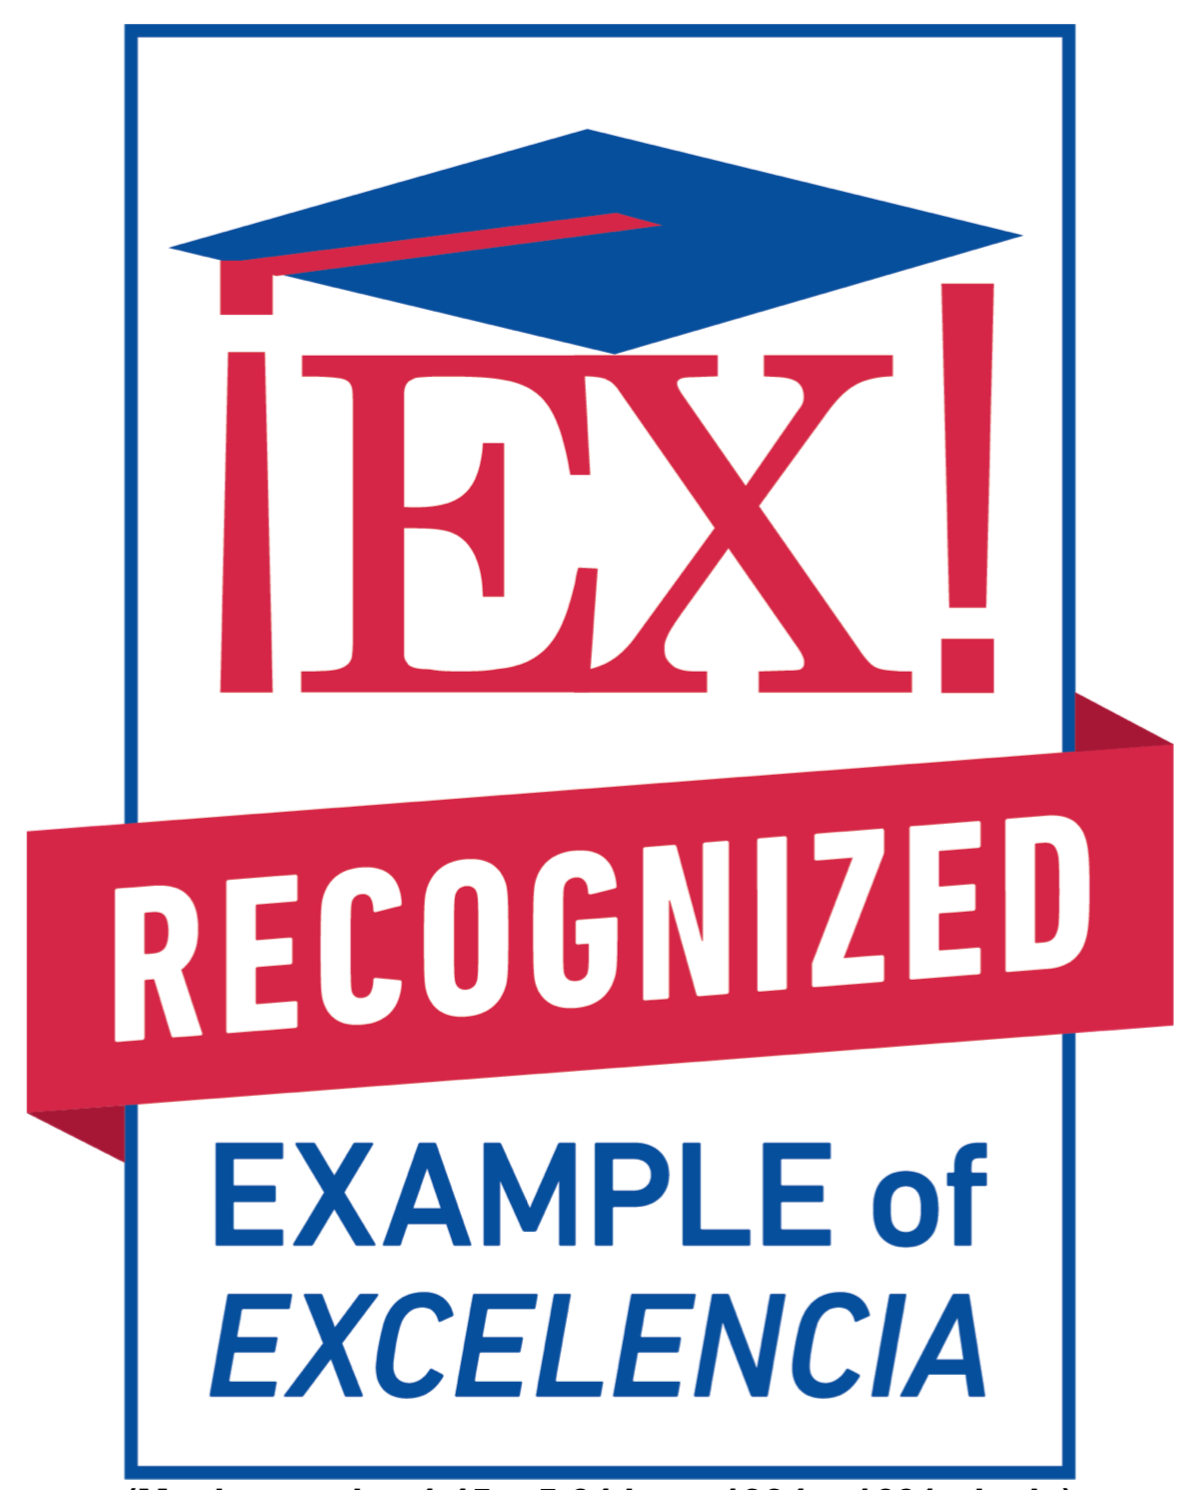 Examples of Excelencia in Education Award Badge